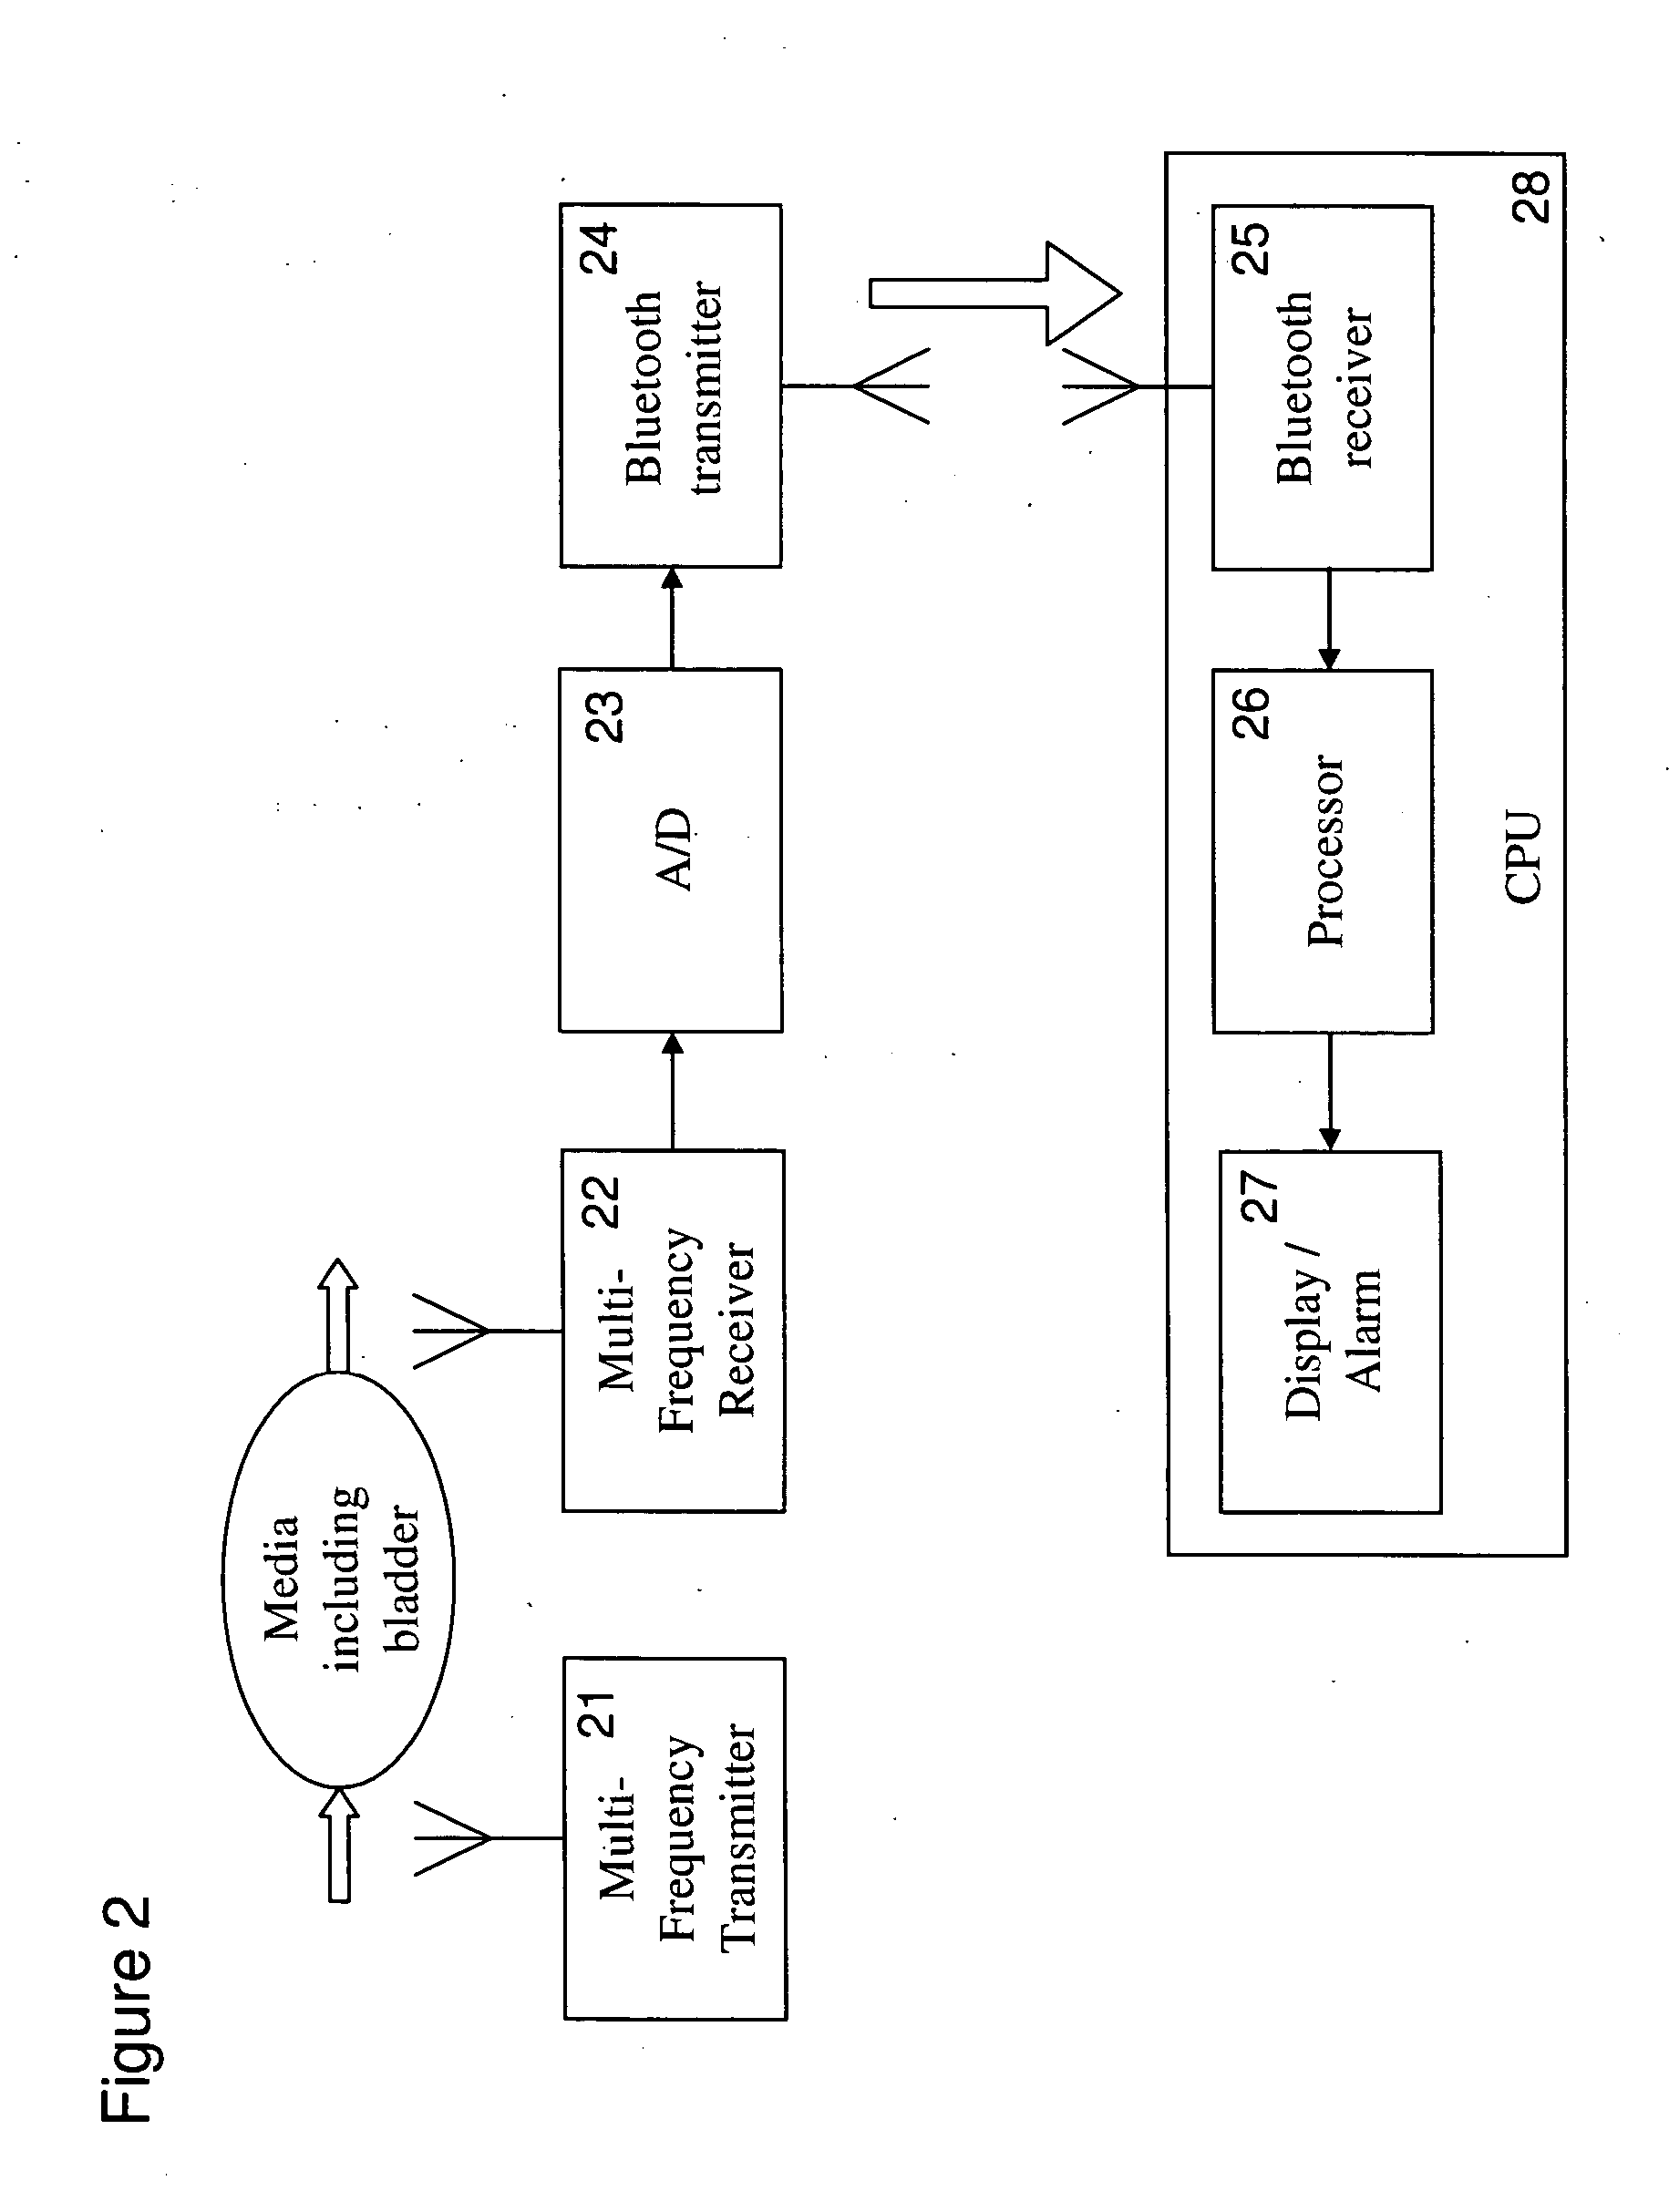 System and method for monitoring the volume of urine within a bladder